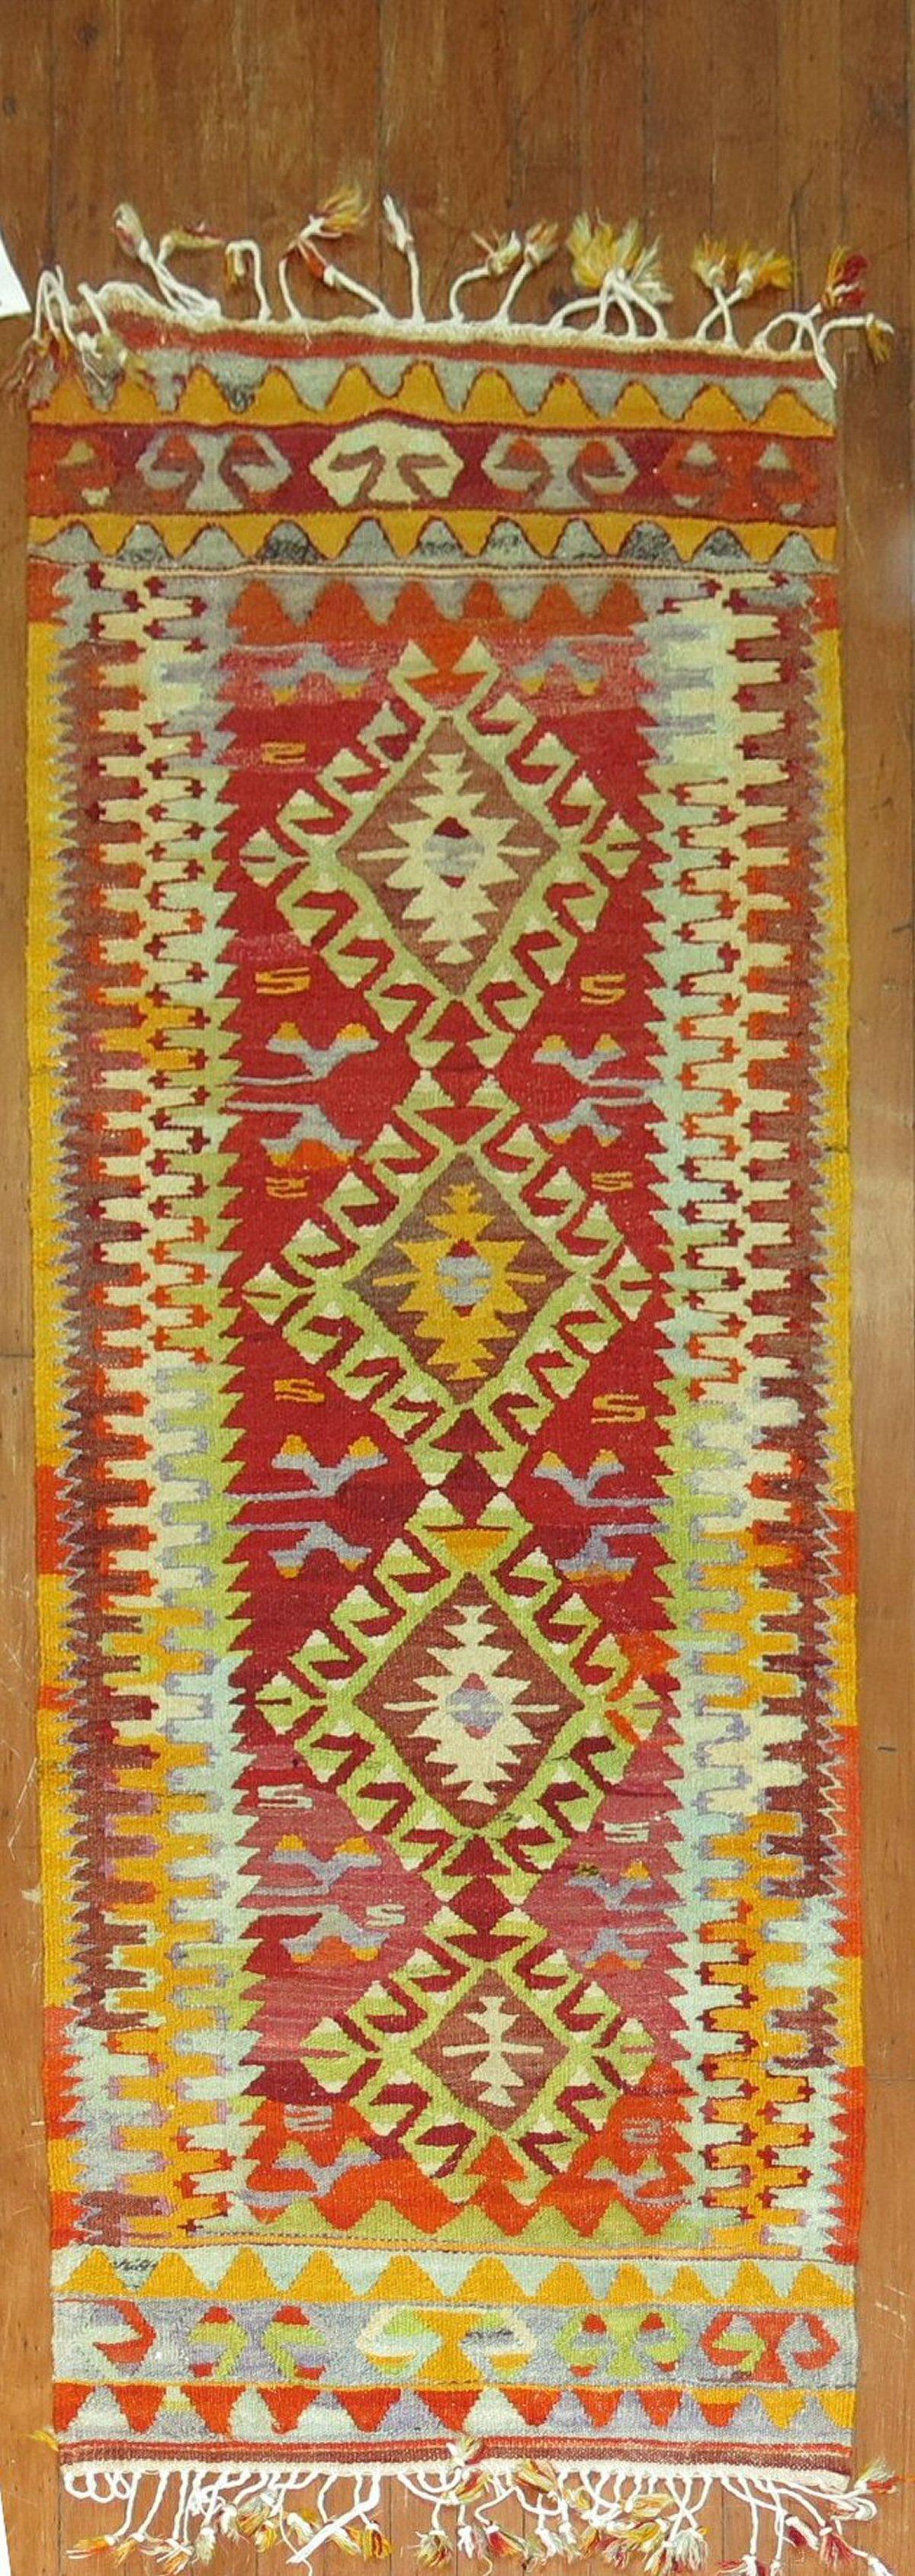 Asian Narrow Kilim Runner in Bright Red and Green